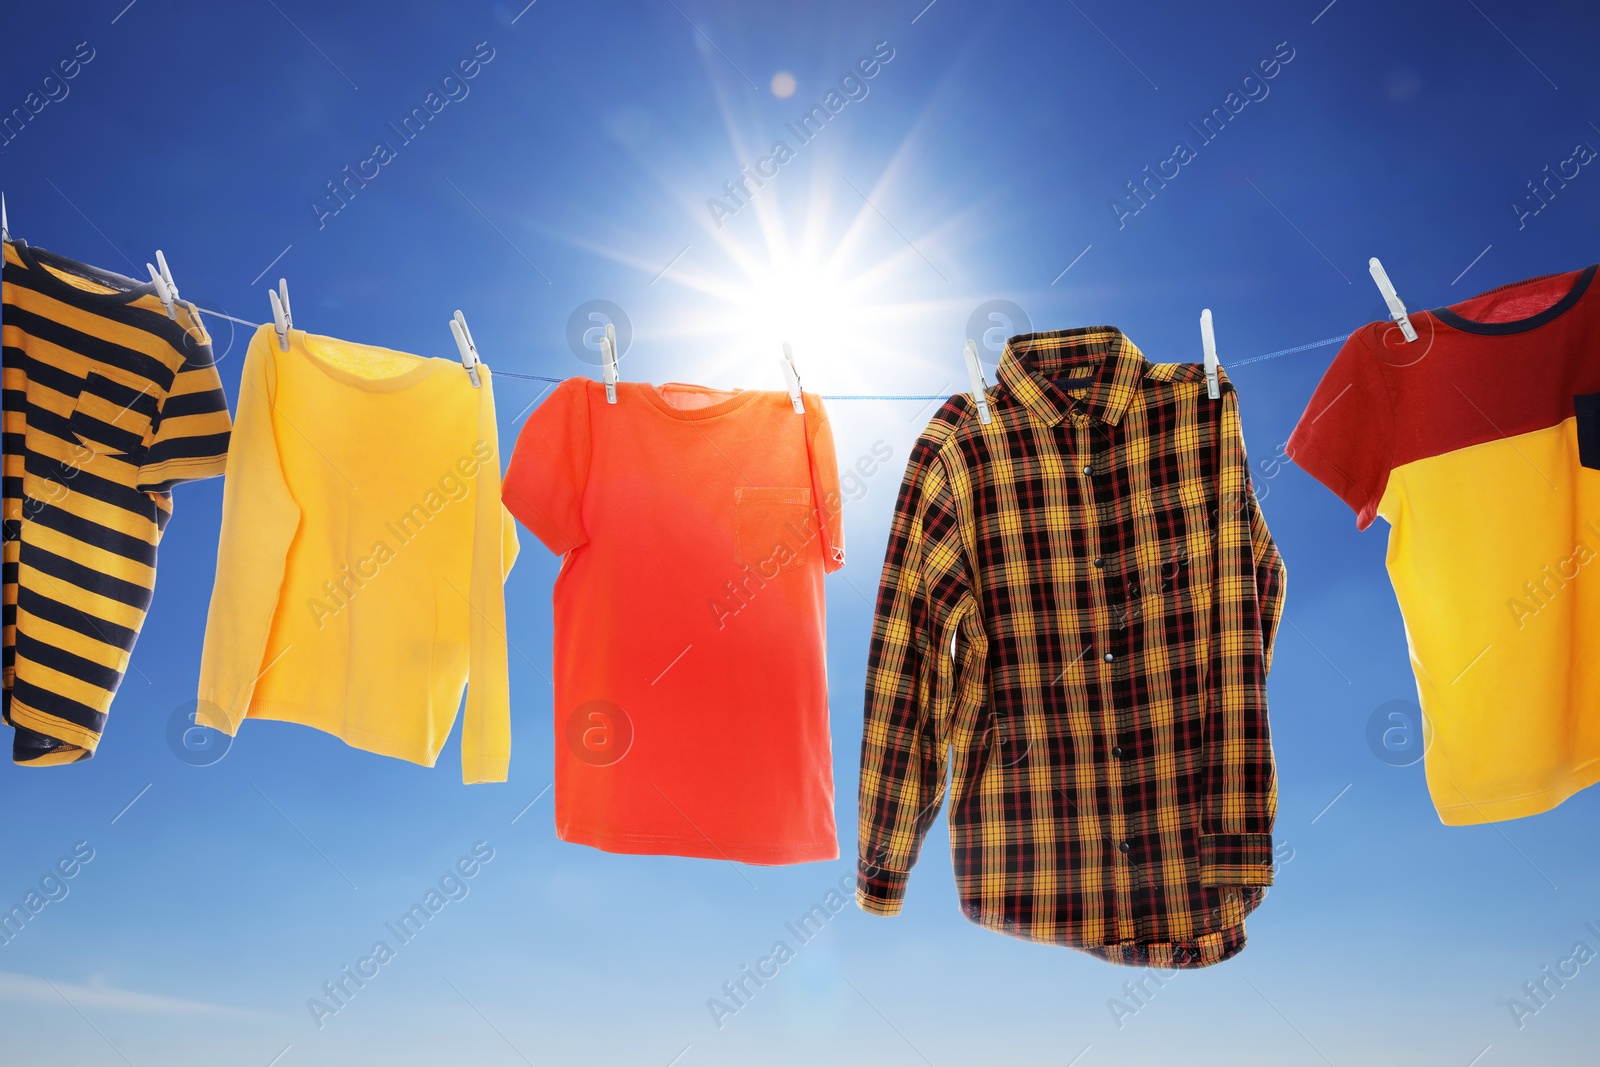 Image of Different clothes drying on washing line against blue sky